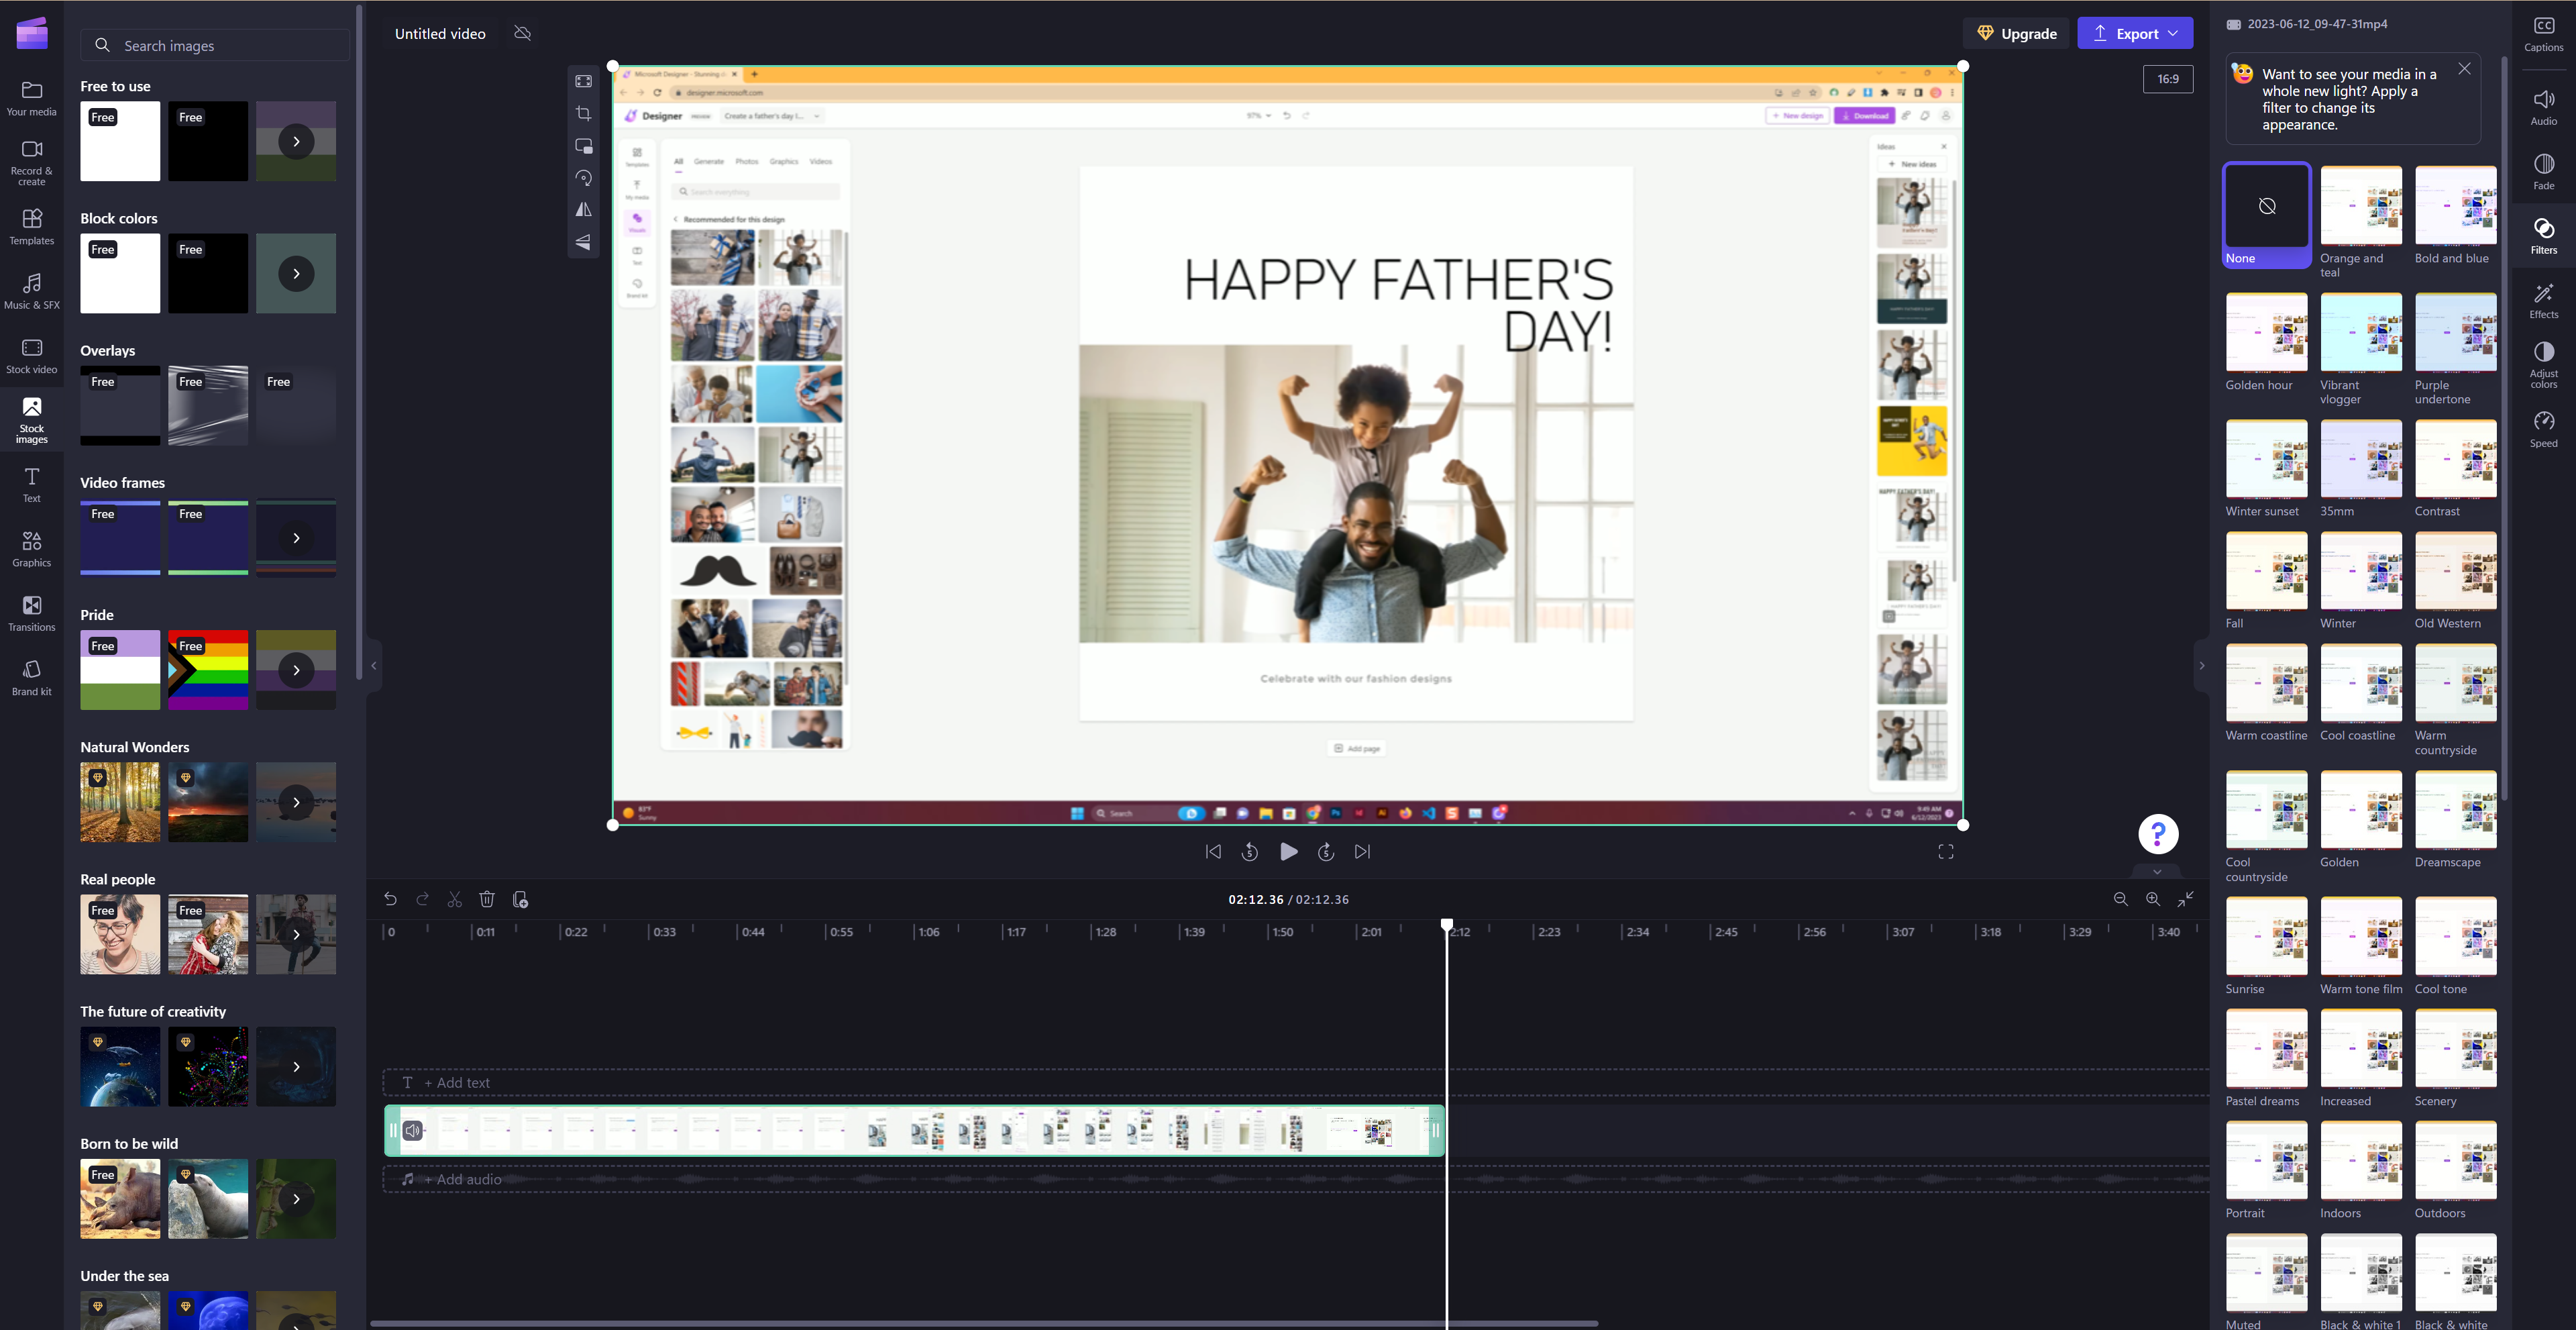 Microsoft clipchamp video editing for free